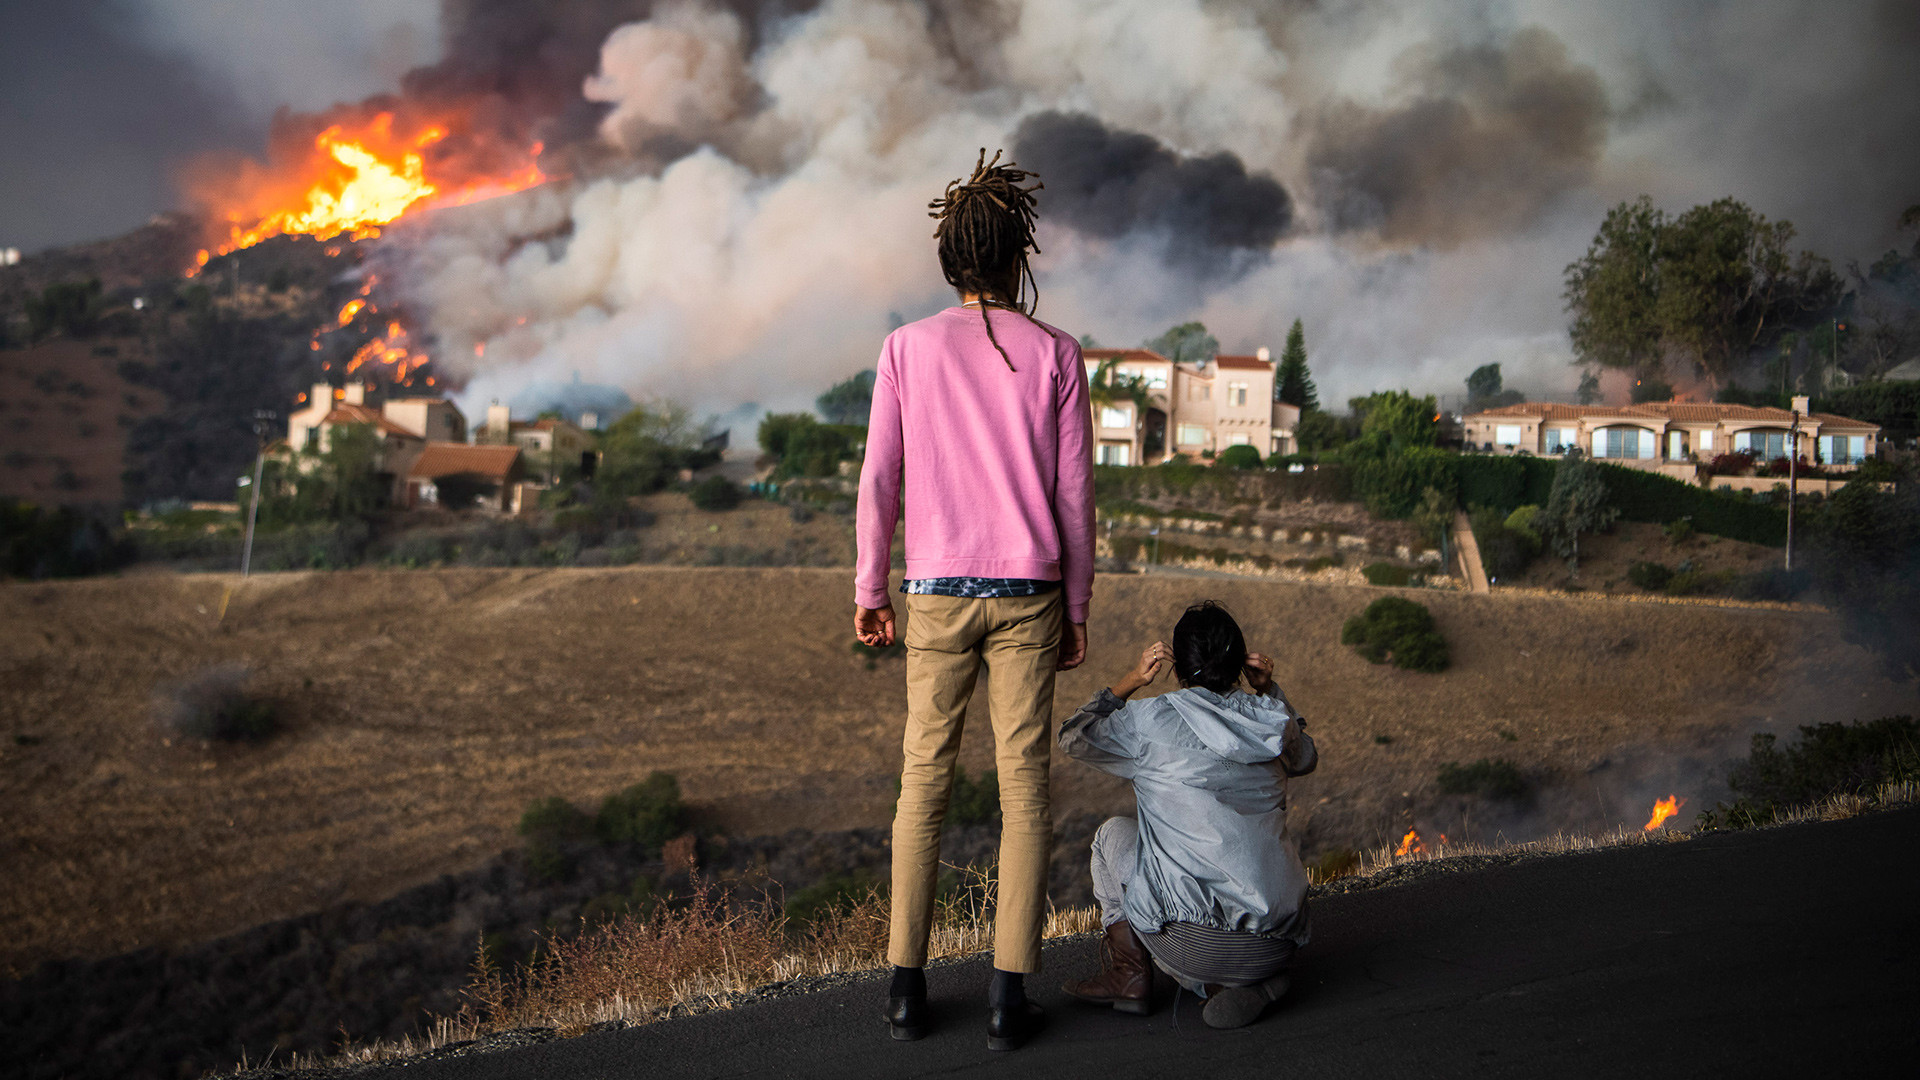 A photo of two people watching a home go up in flames.